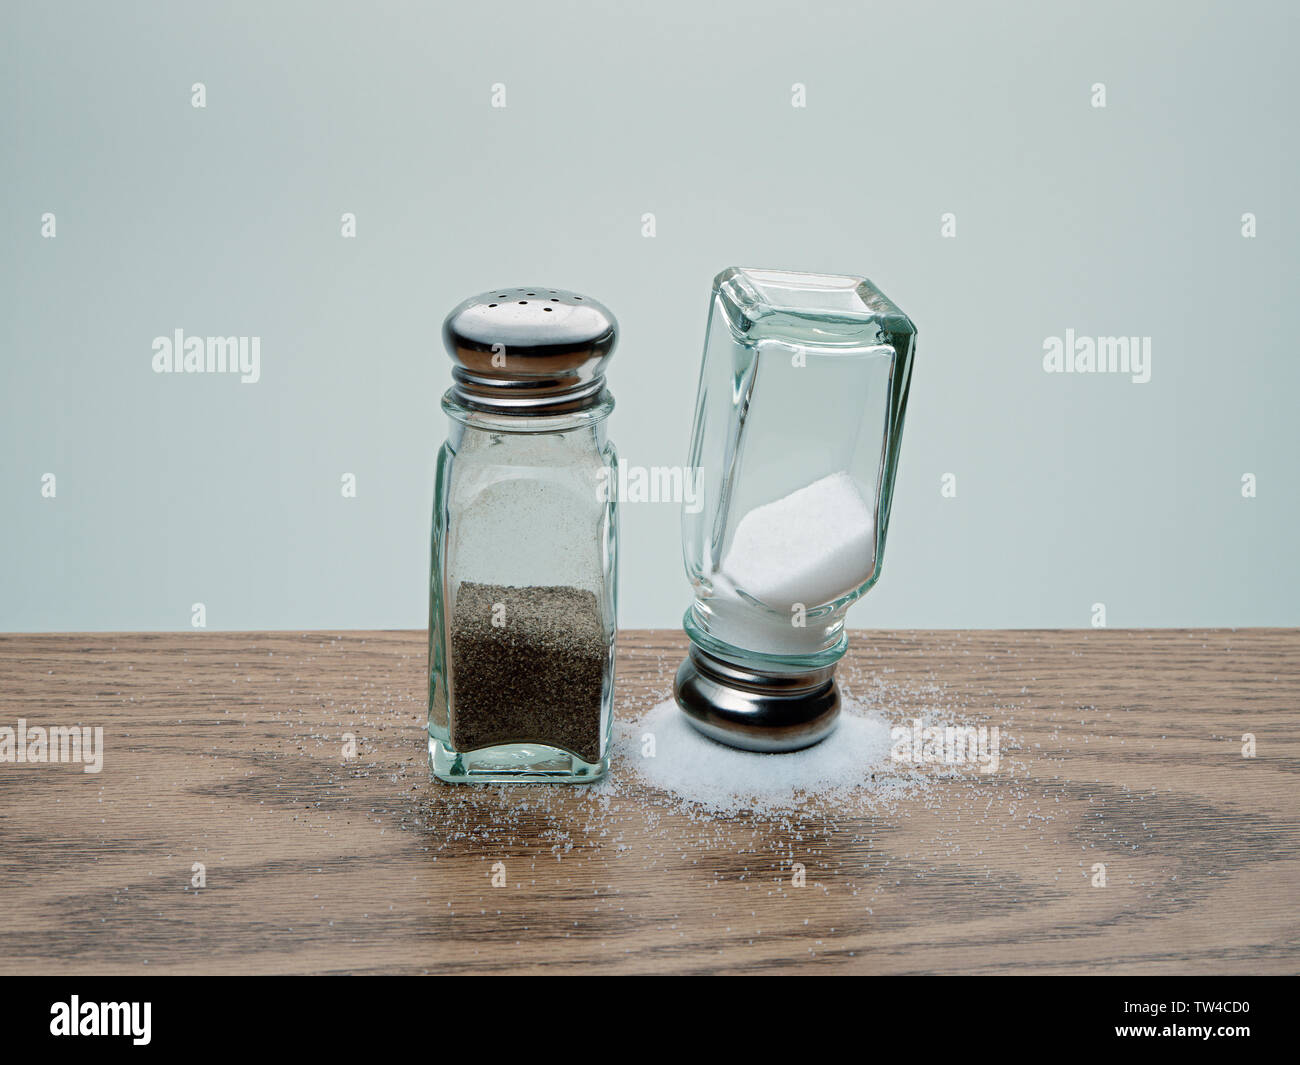 Balancing trick with upside down salt shaker balanced on spilled salt  beside tipped over pepper shaker on wood table Stock Photo - Alamy